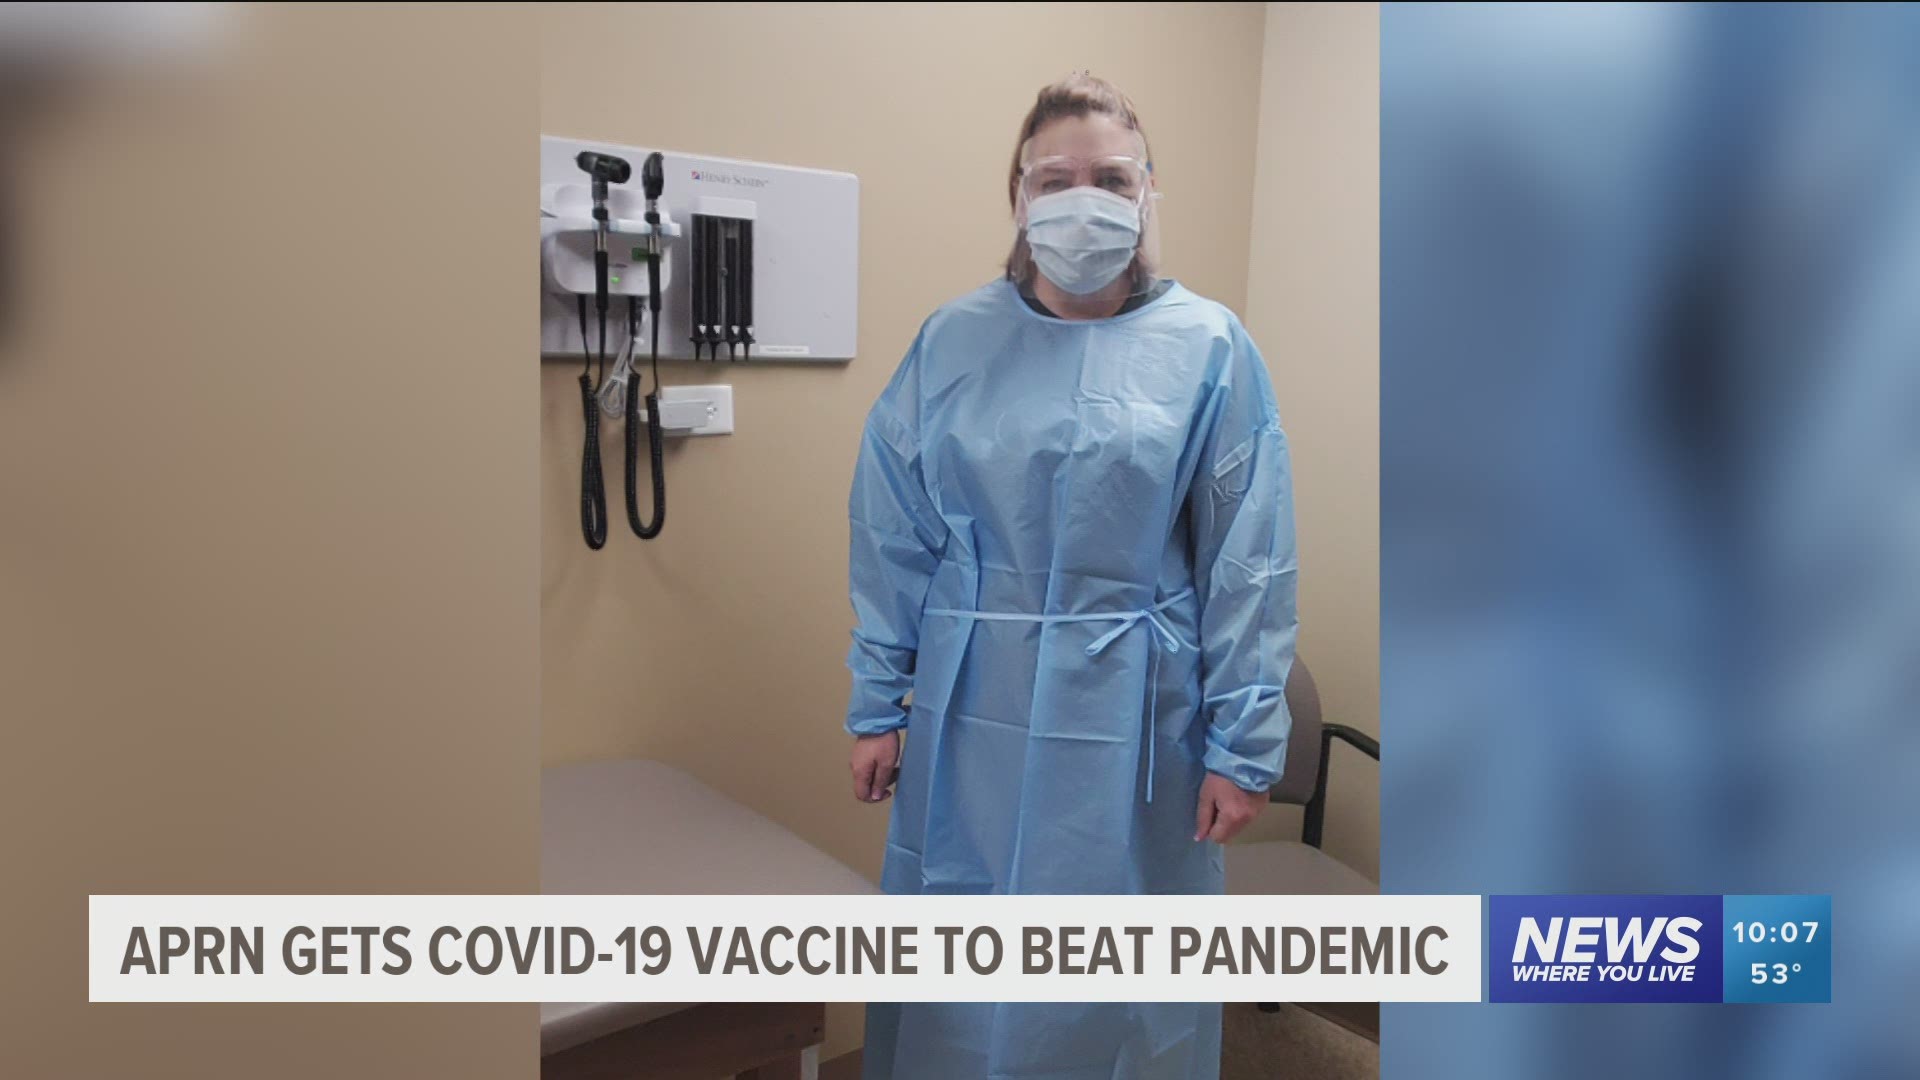 Mary Lunsford is an APRN who chose to get vaccinated after spending the last year caring for COVID-19 patients at the urgent care where she works.